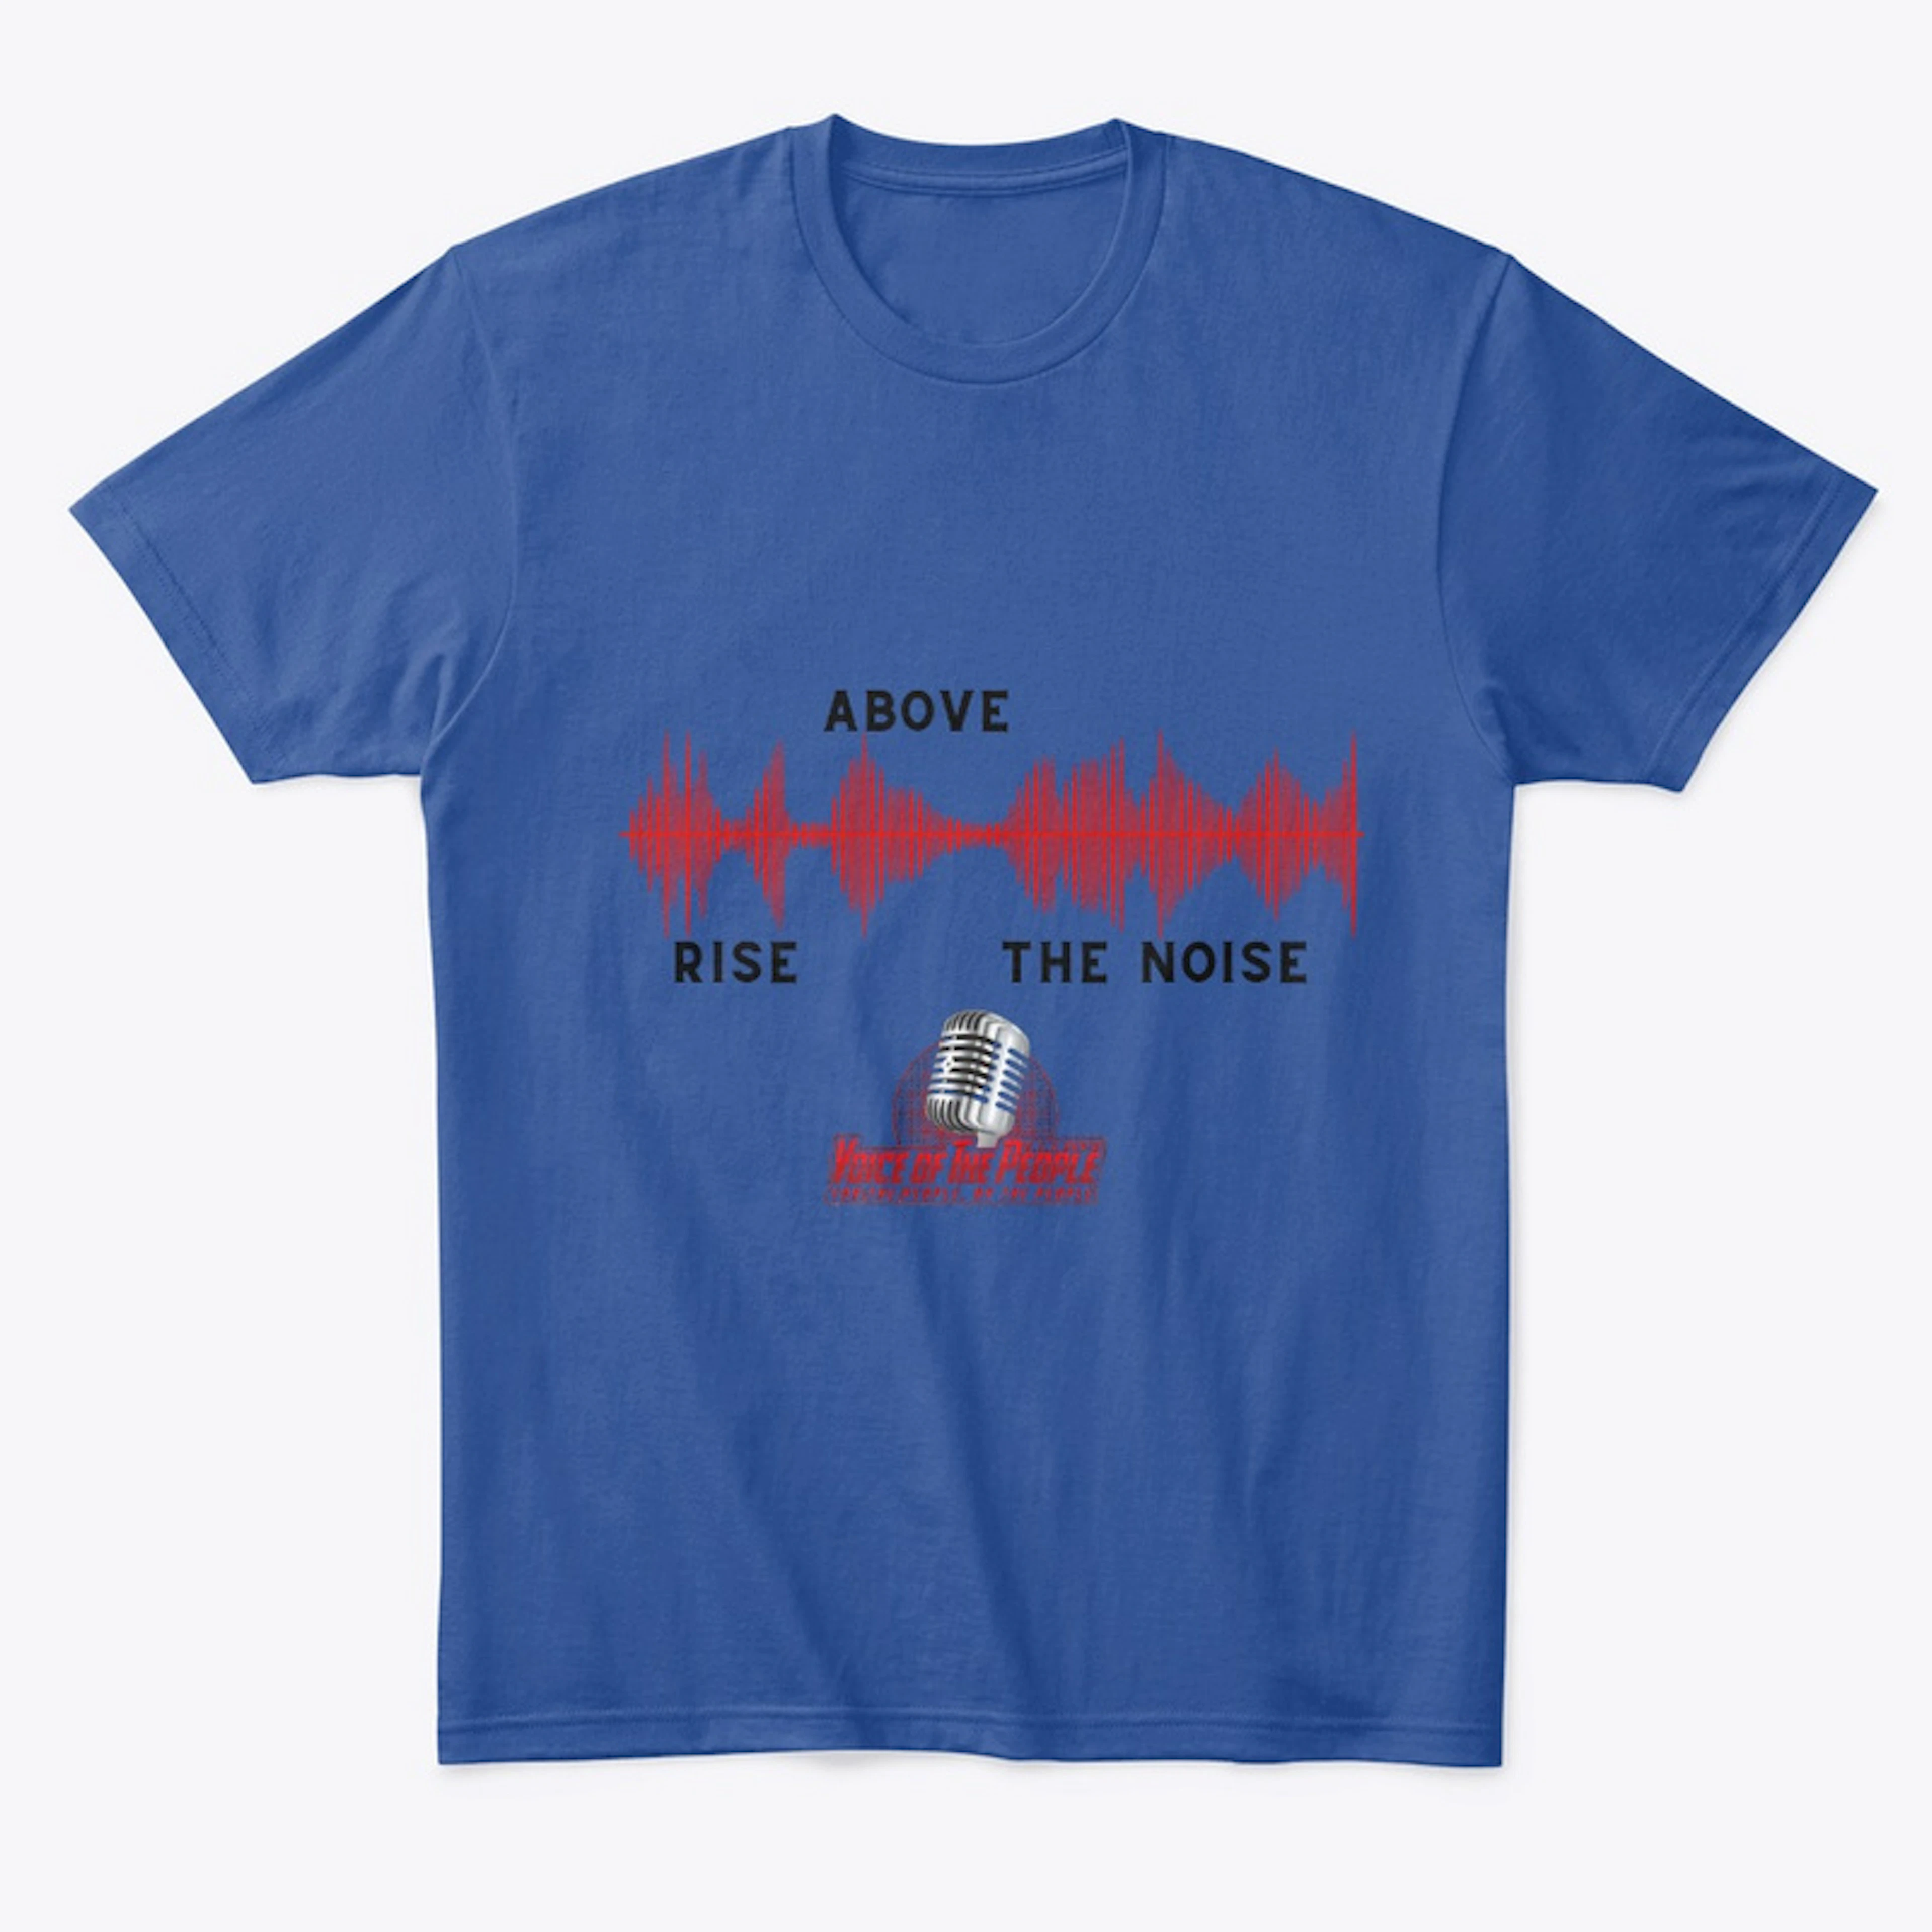 Rise Above the Noise